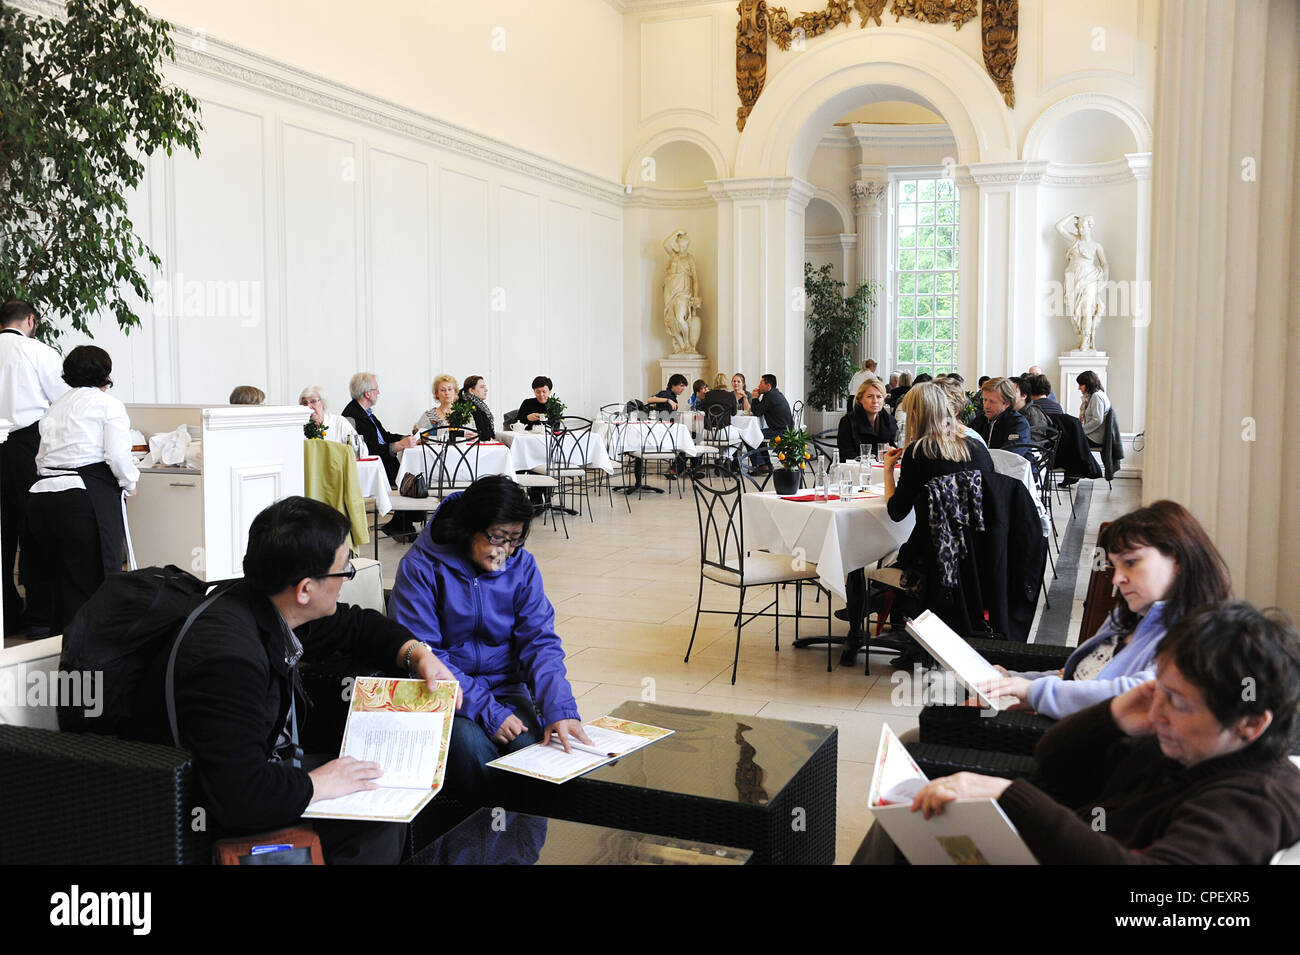 The Orangery in Kensington Gardens in London with customers sitting at tables inside the restaurant. Stock Photo